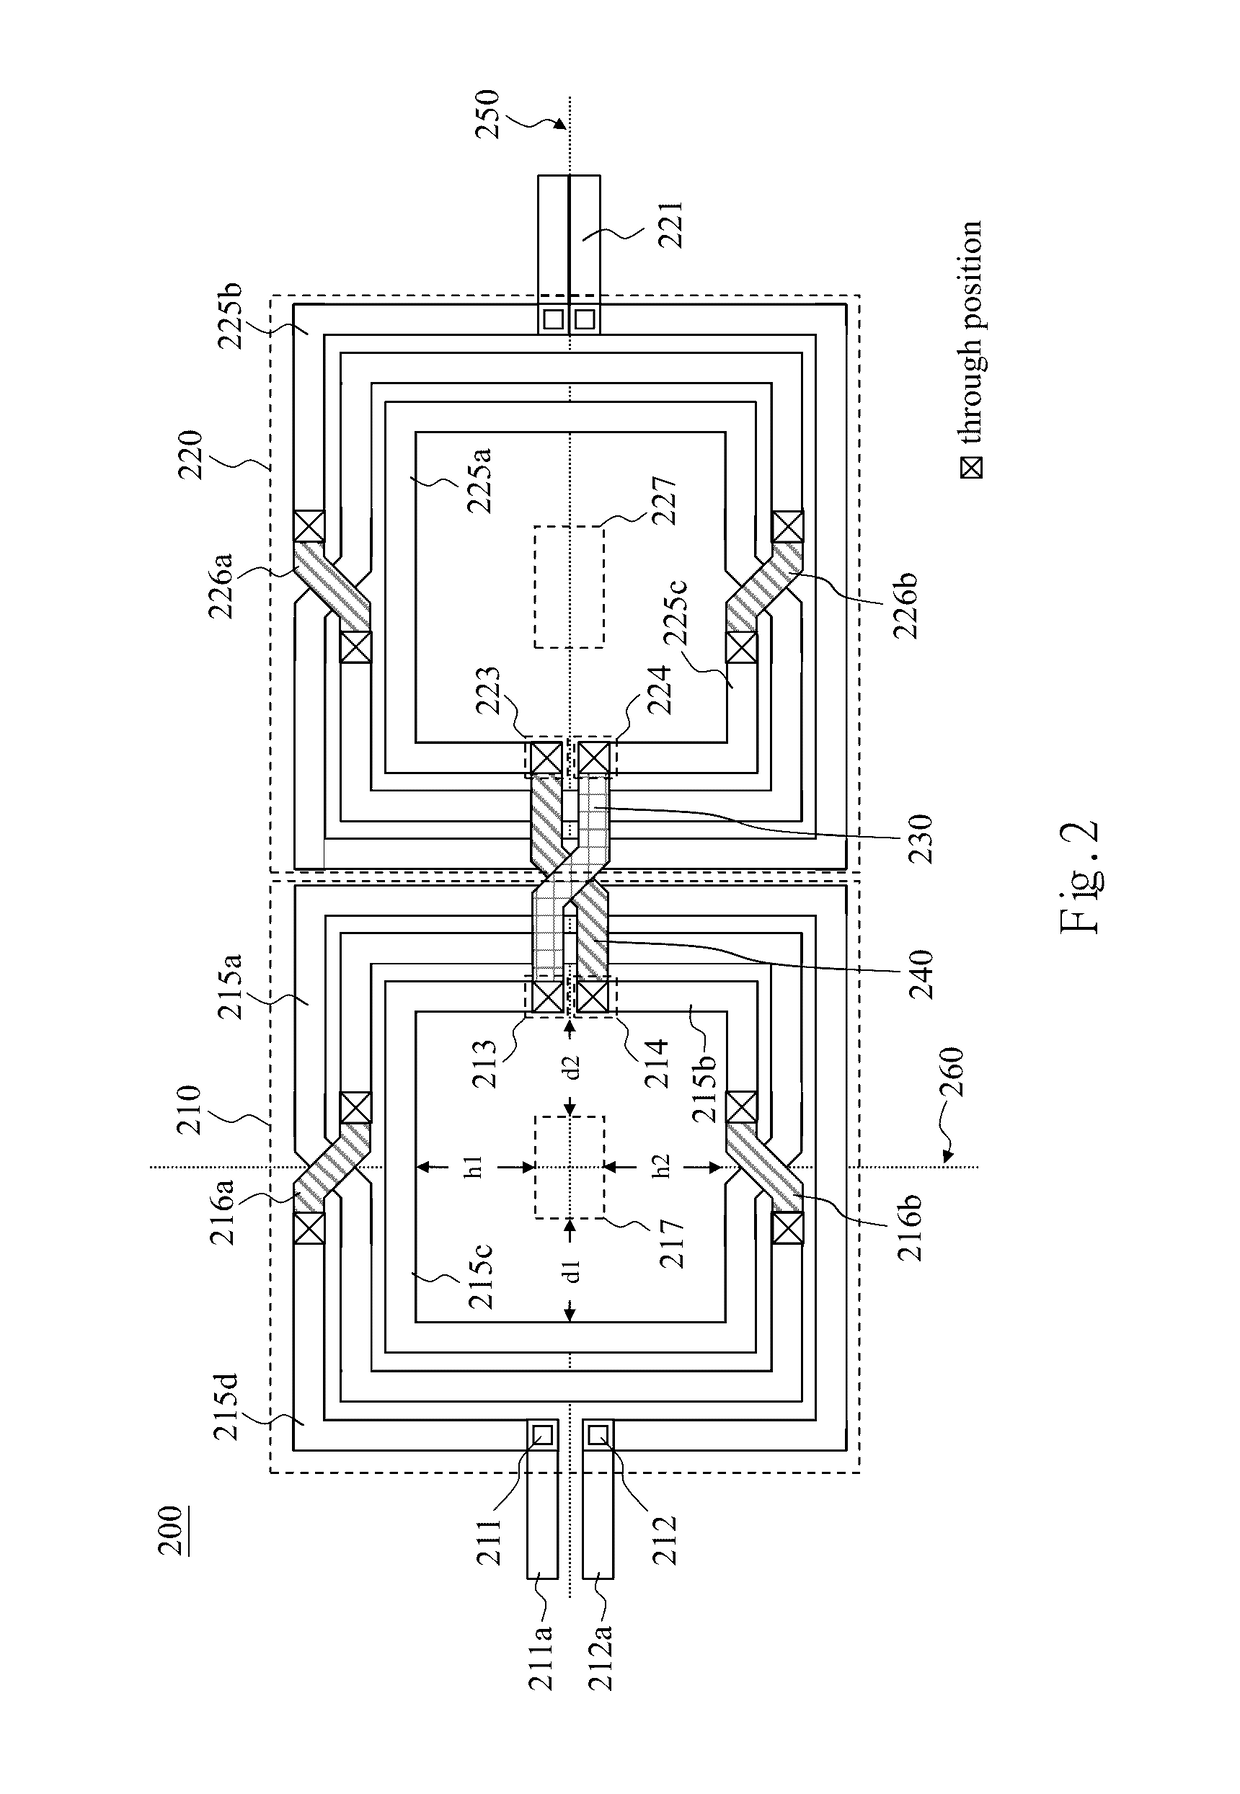 Integrated Inductor Structure and Integrated Transformer Structure